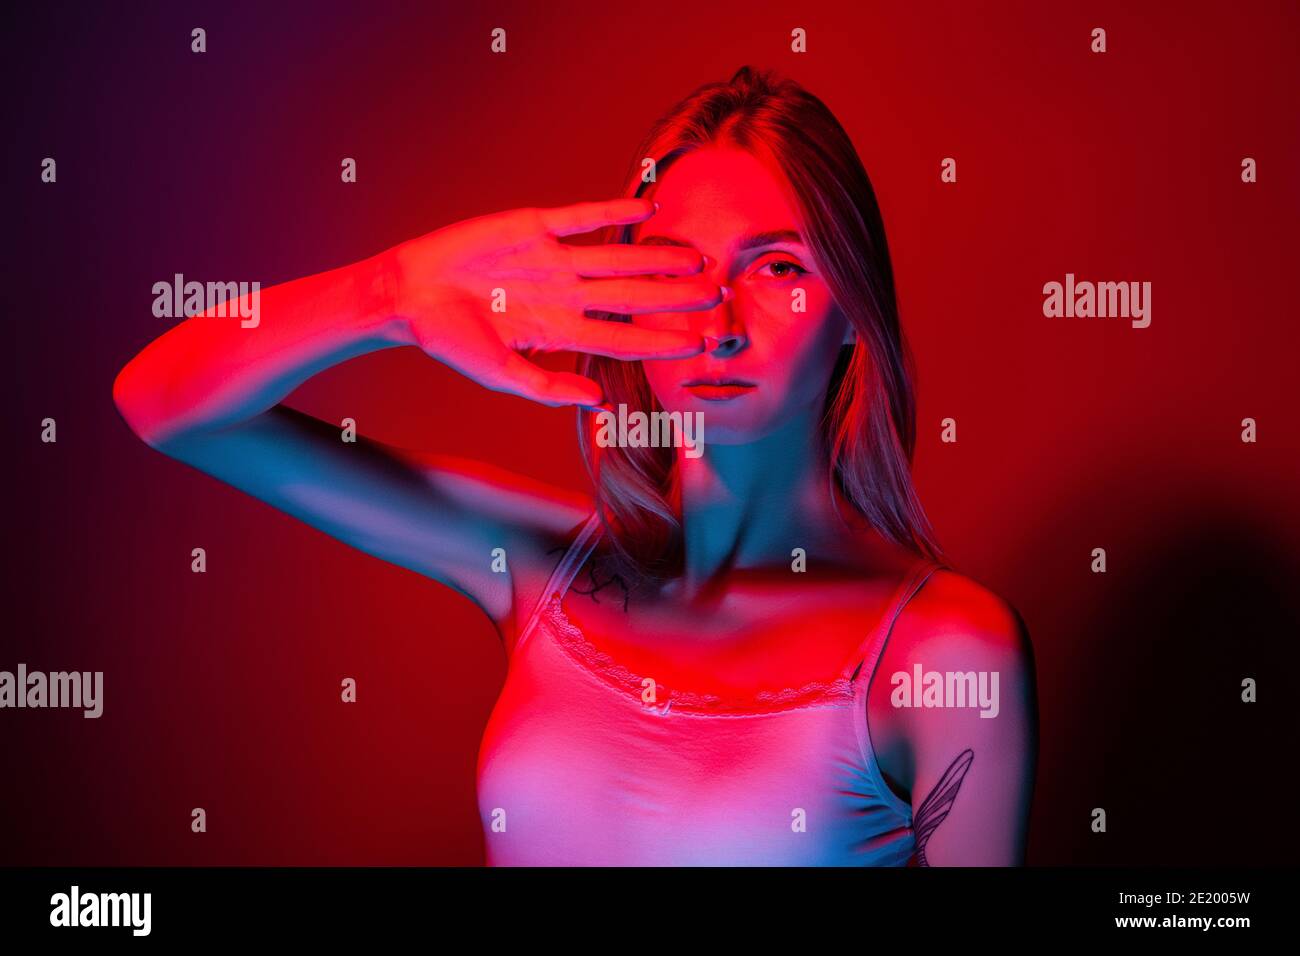 Unemotional young female covering eyes with hand in studio with red light Stock Photo